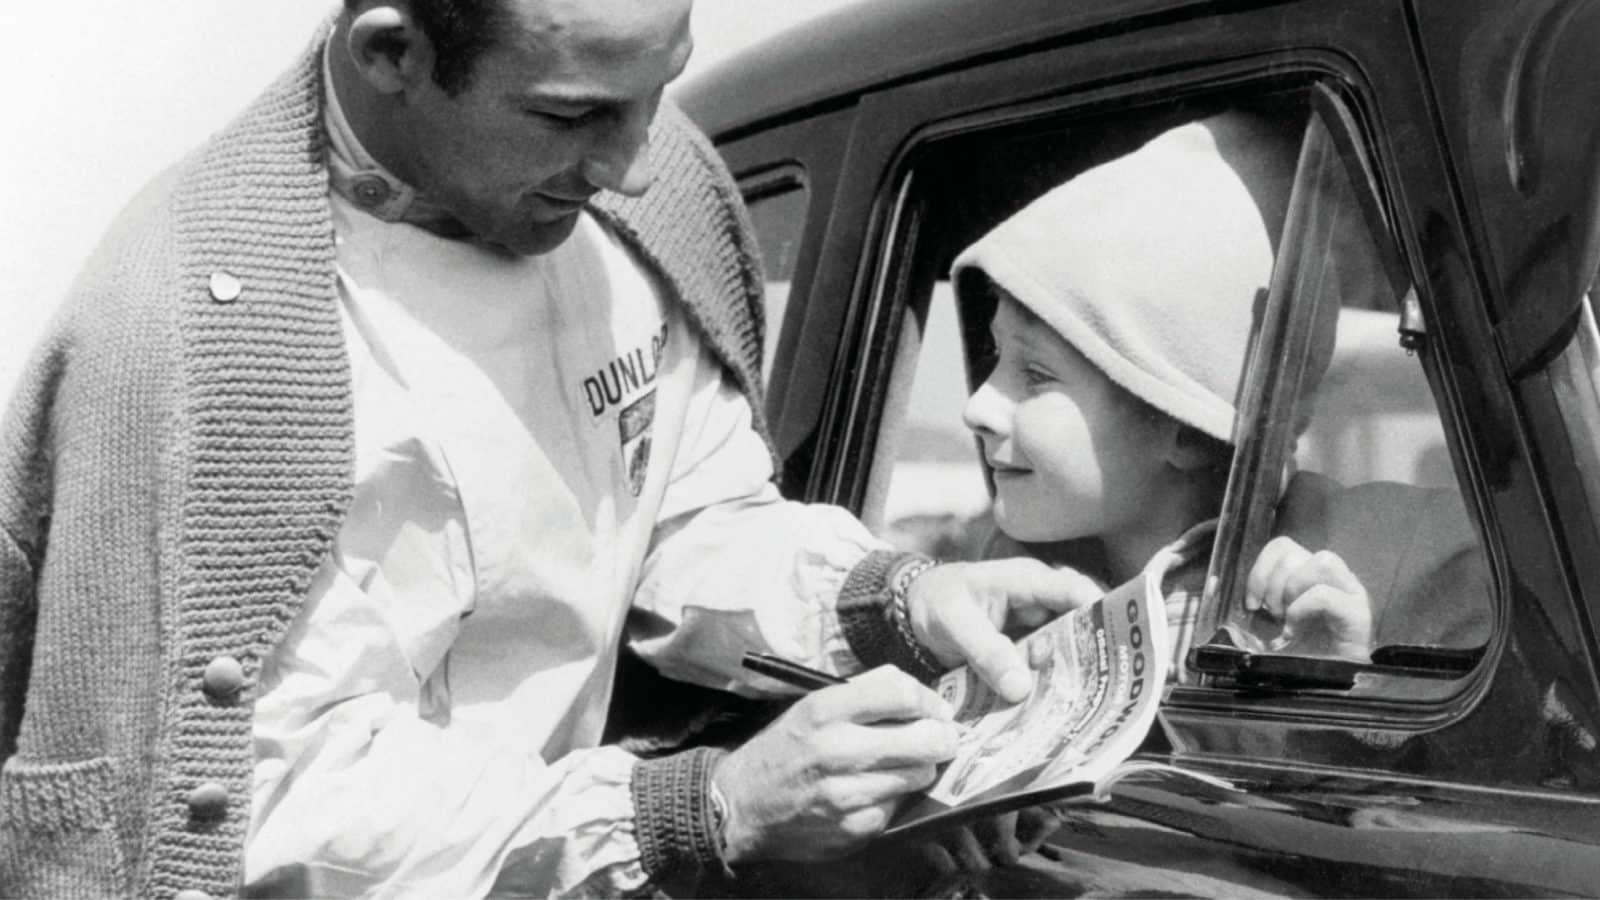 Stirling Moss signs an autograph